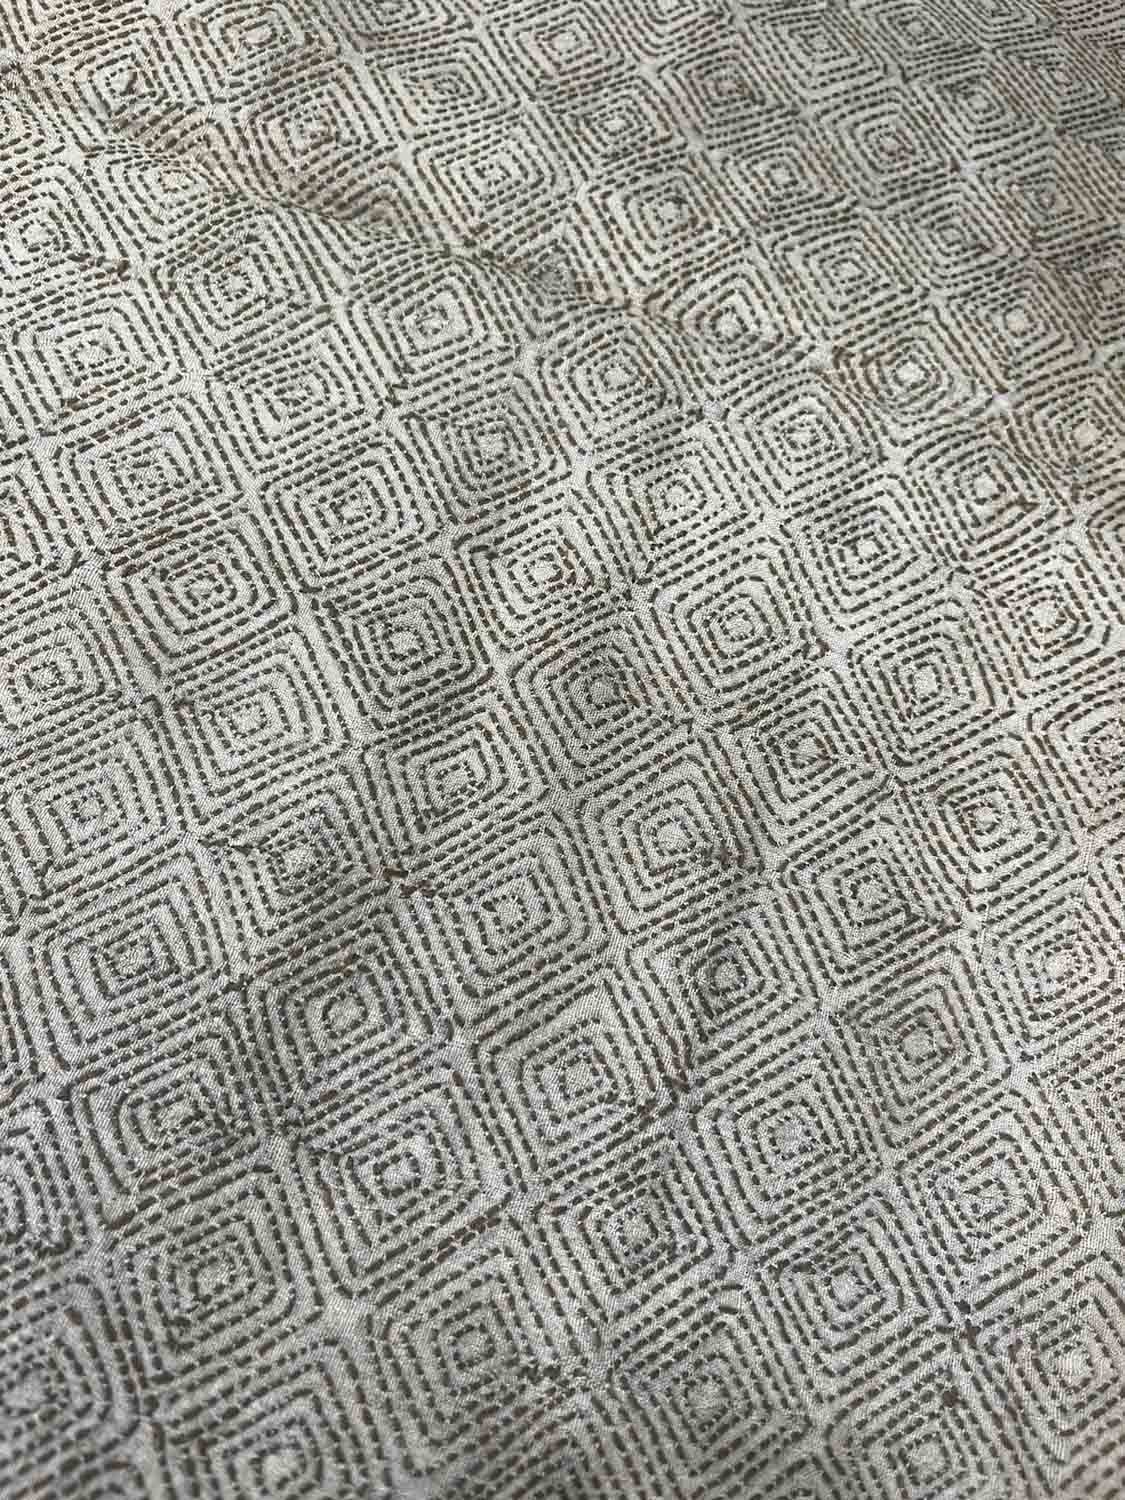 Off White Kantha Hand Embroidered Pure Tussar Silk Fabric ( 1 Mtr ) - Luxurion World